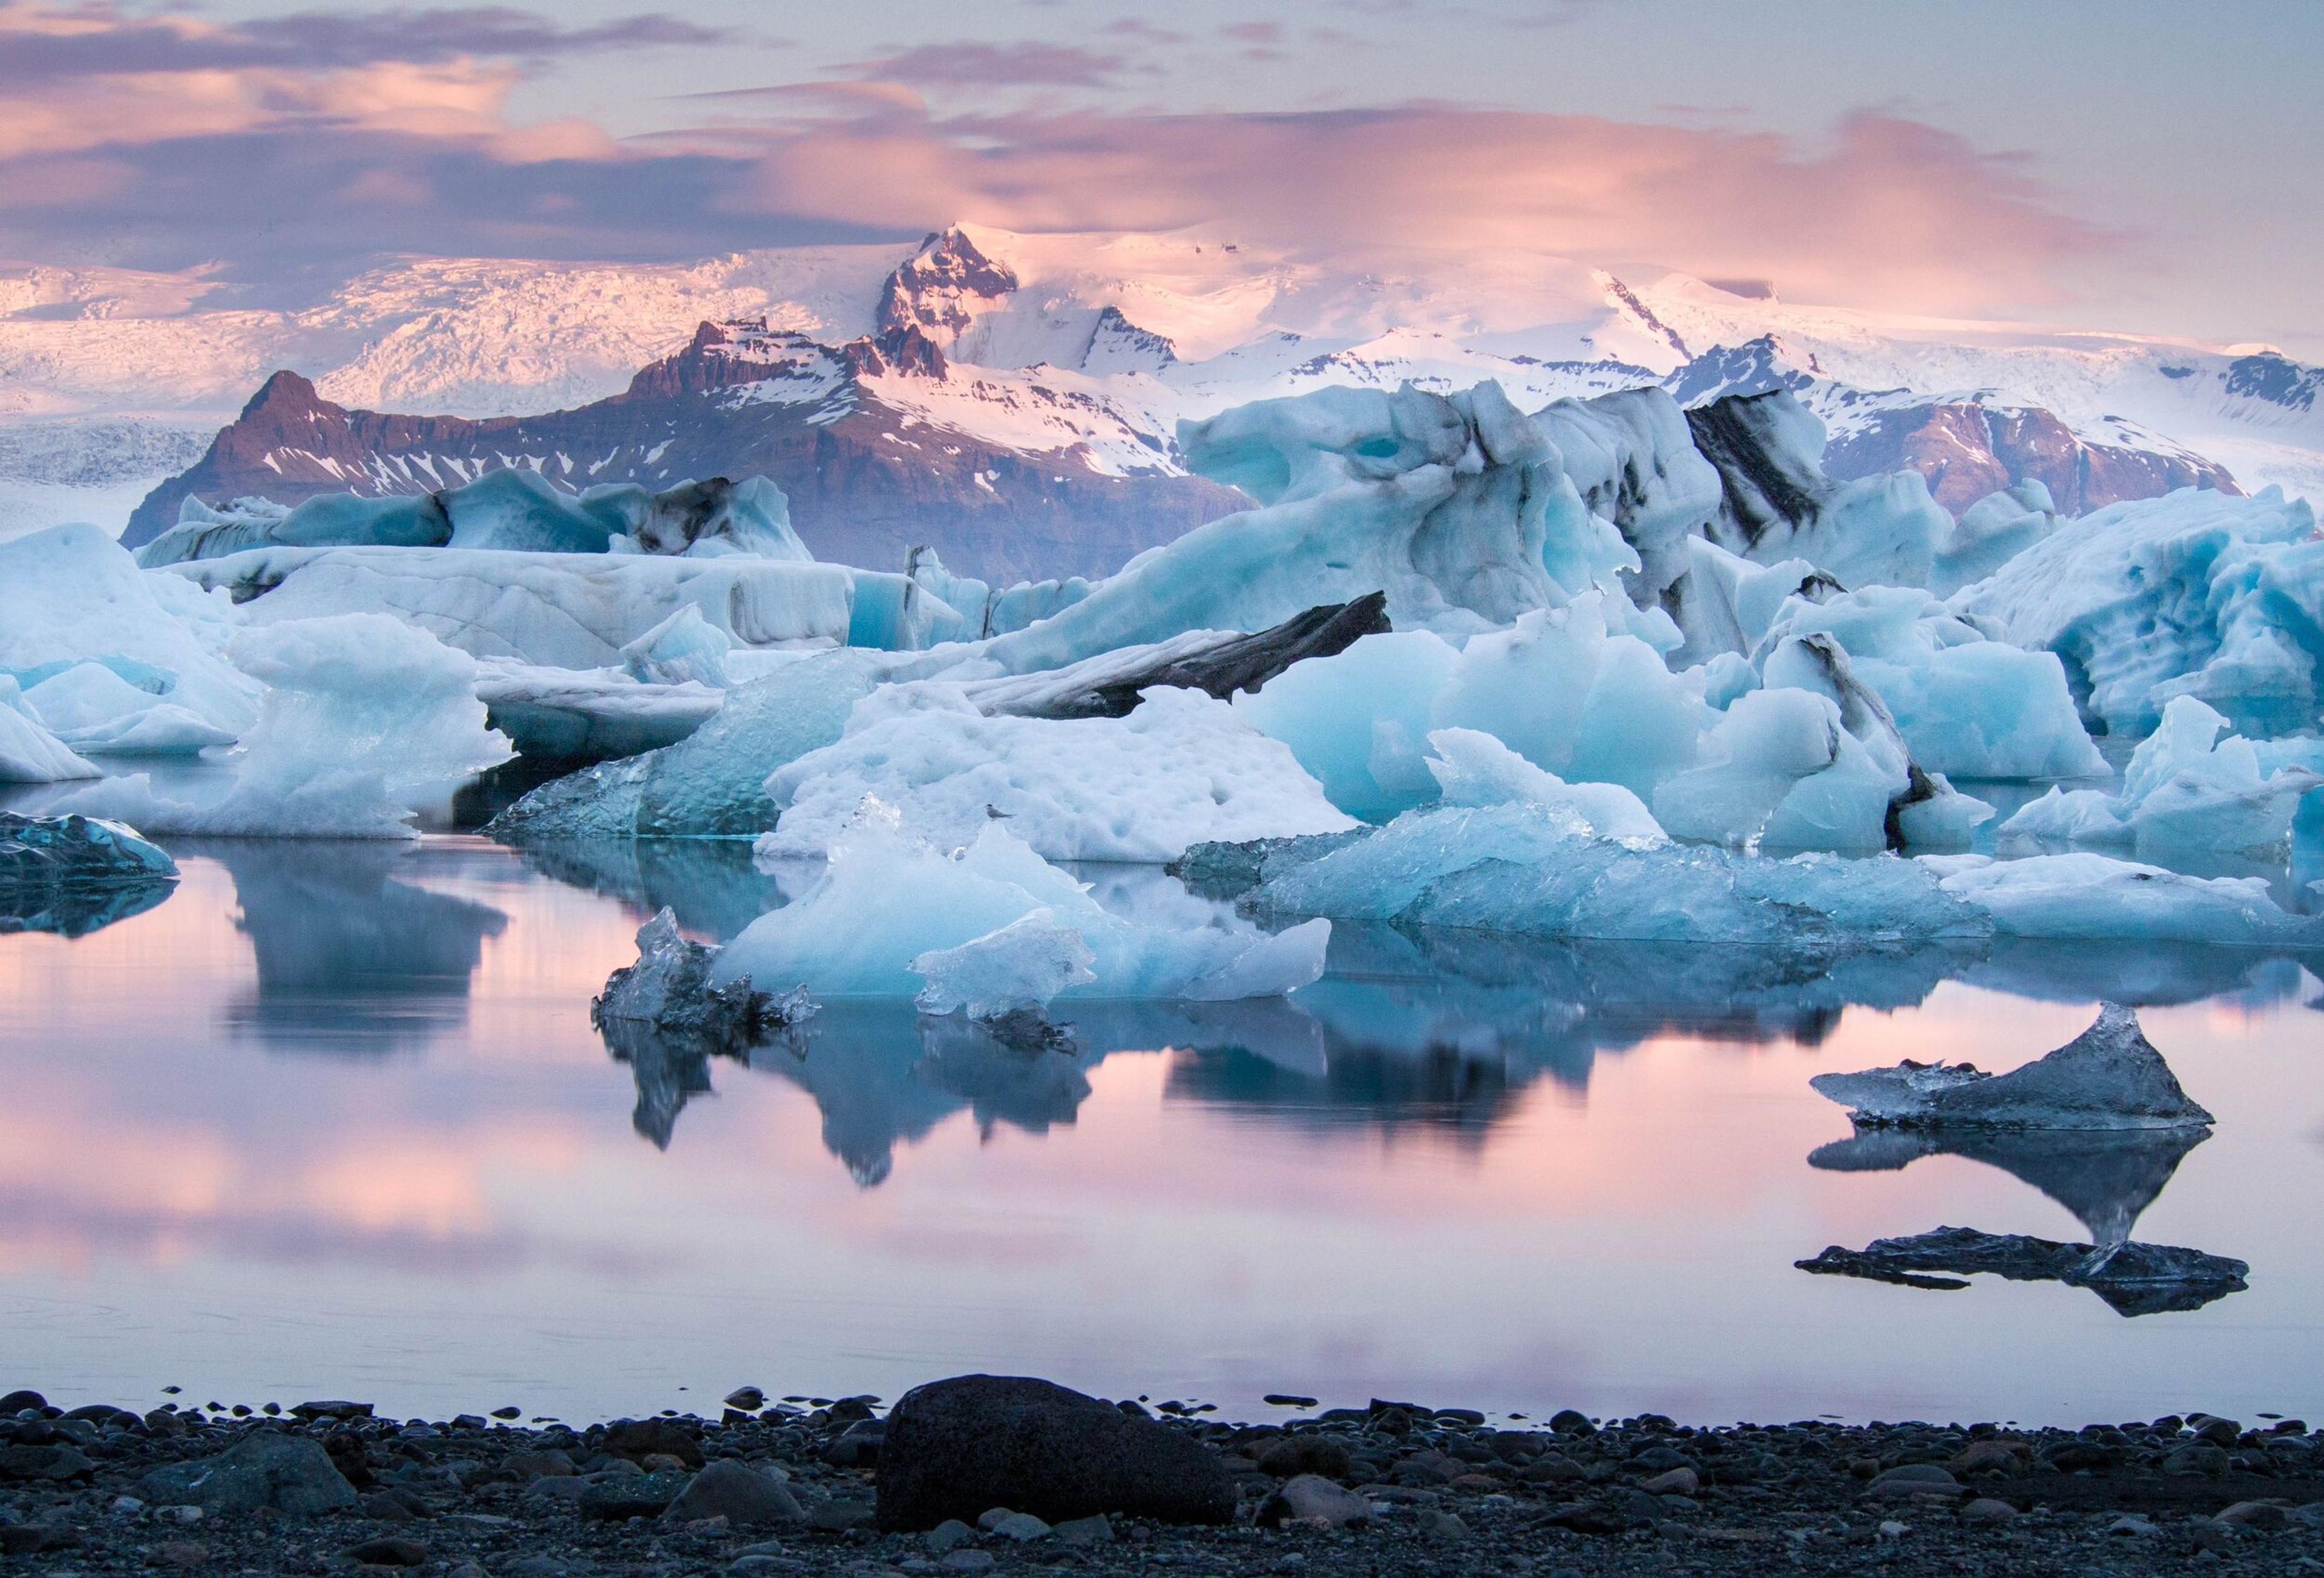 Icebergs floating in a glacial lagoon with reflections in the calm water, under a pastel-colored sky with pink hues at dawn or dusk, and snow-capped mountains in the distance.